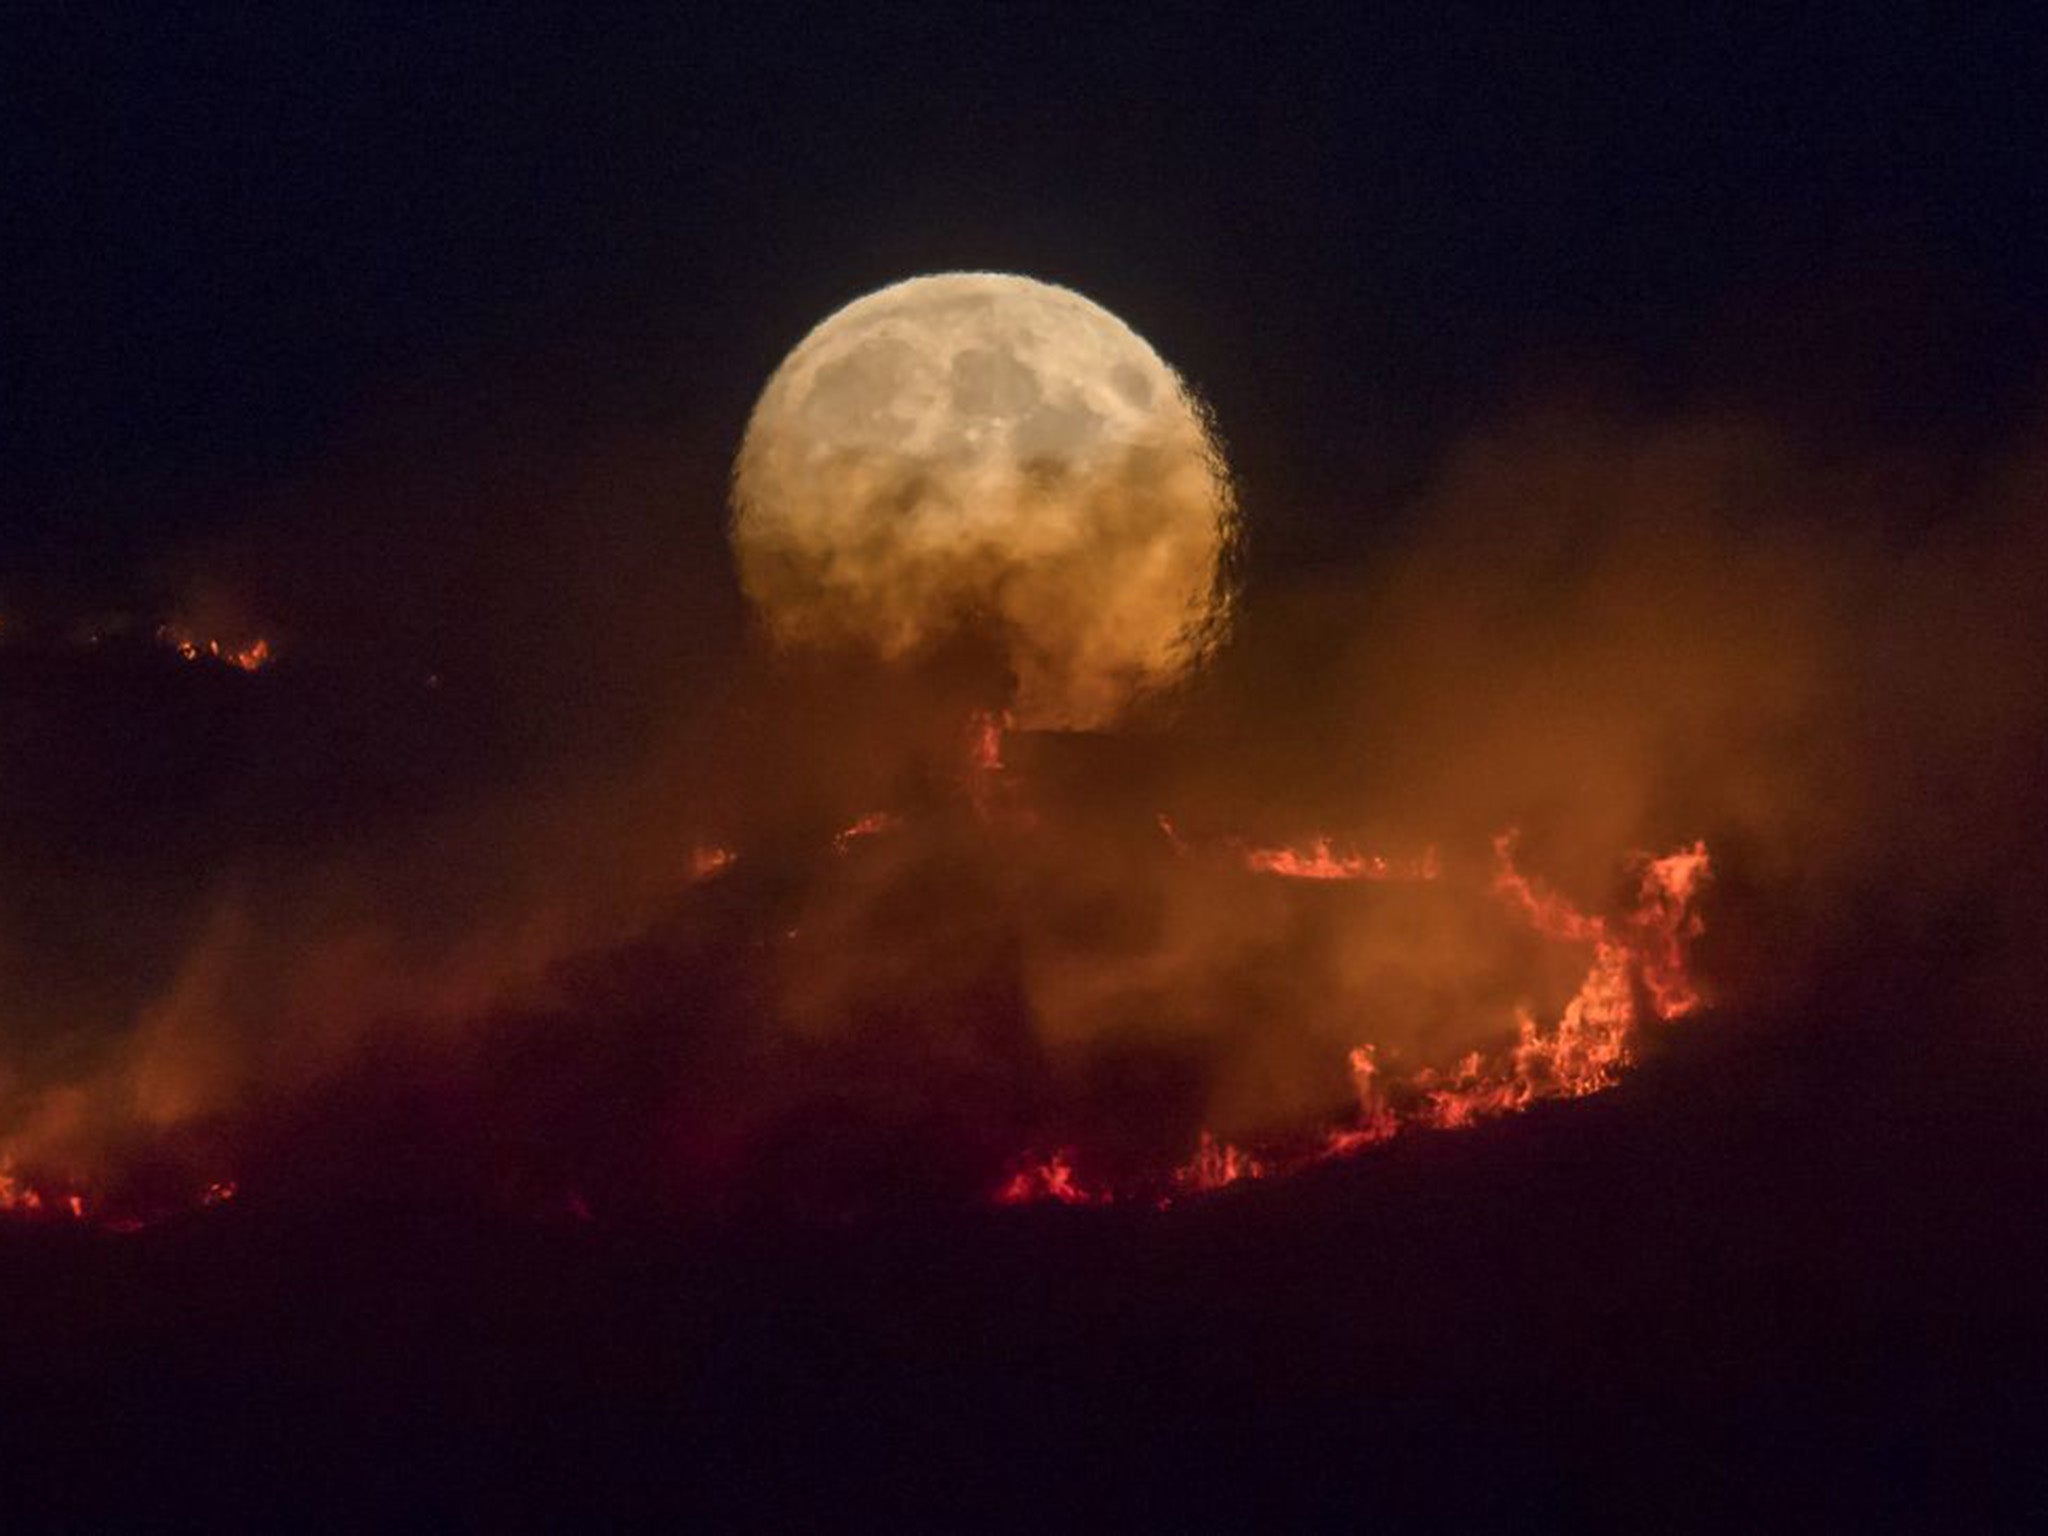 A full moon rises over Saddleworth Moor in the Peak District during wildfires in 2018